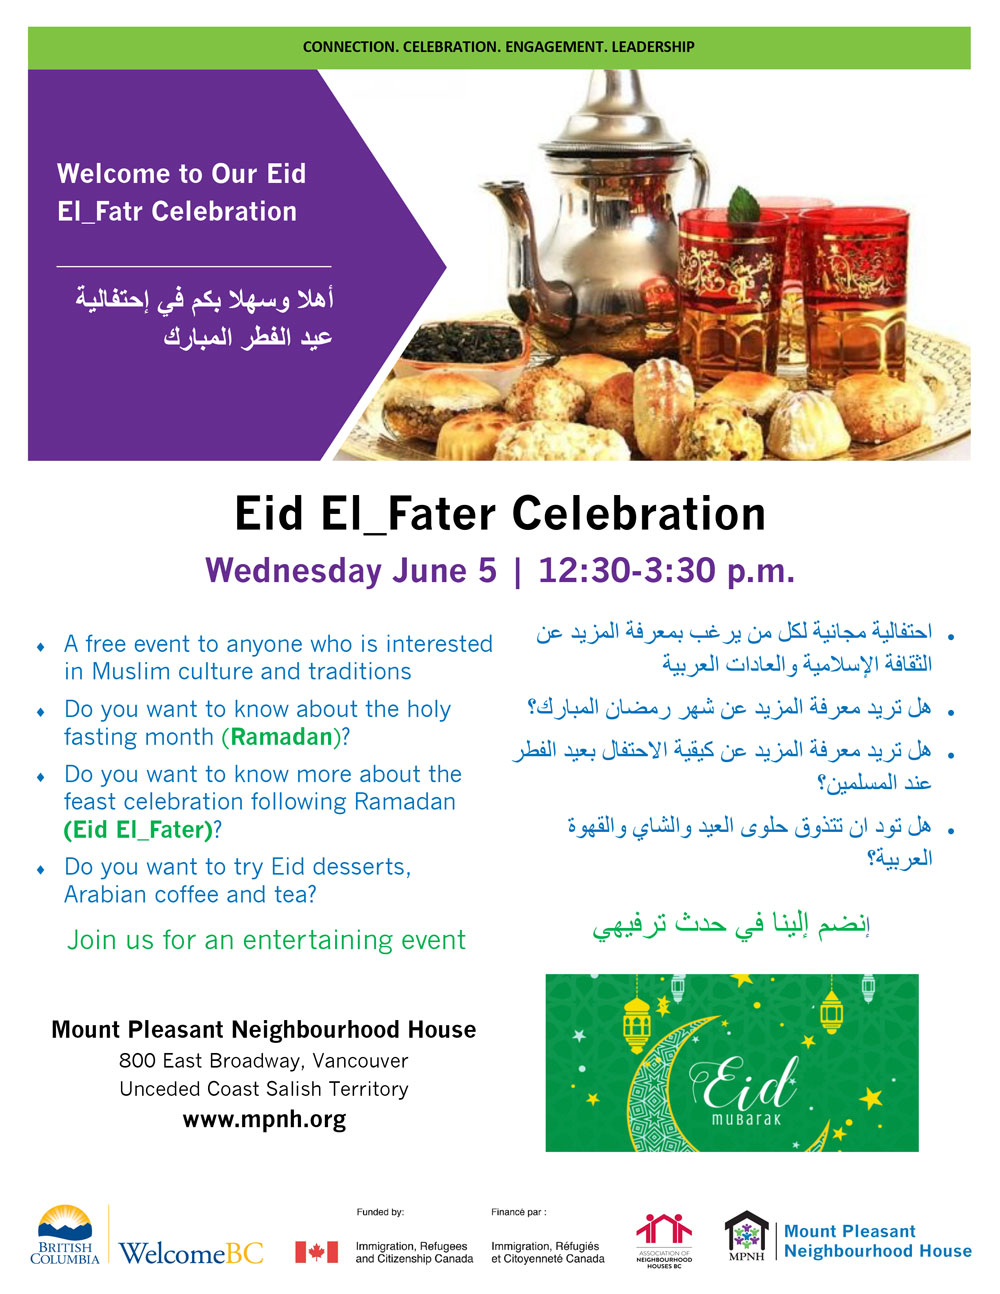 An image of the poster with event details, featuring a photo of desserts, Arabian coffee, and tea.